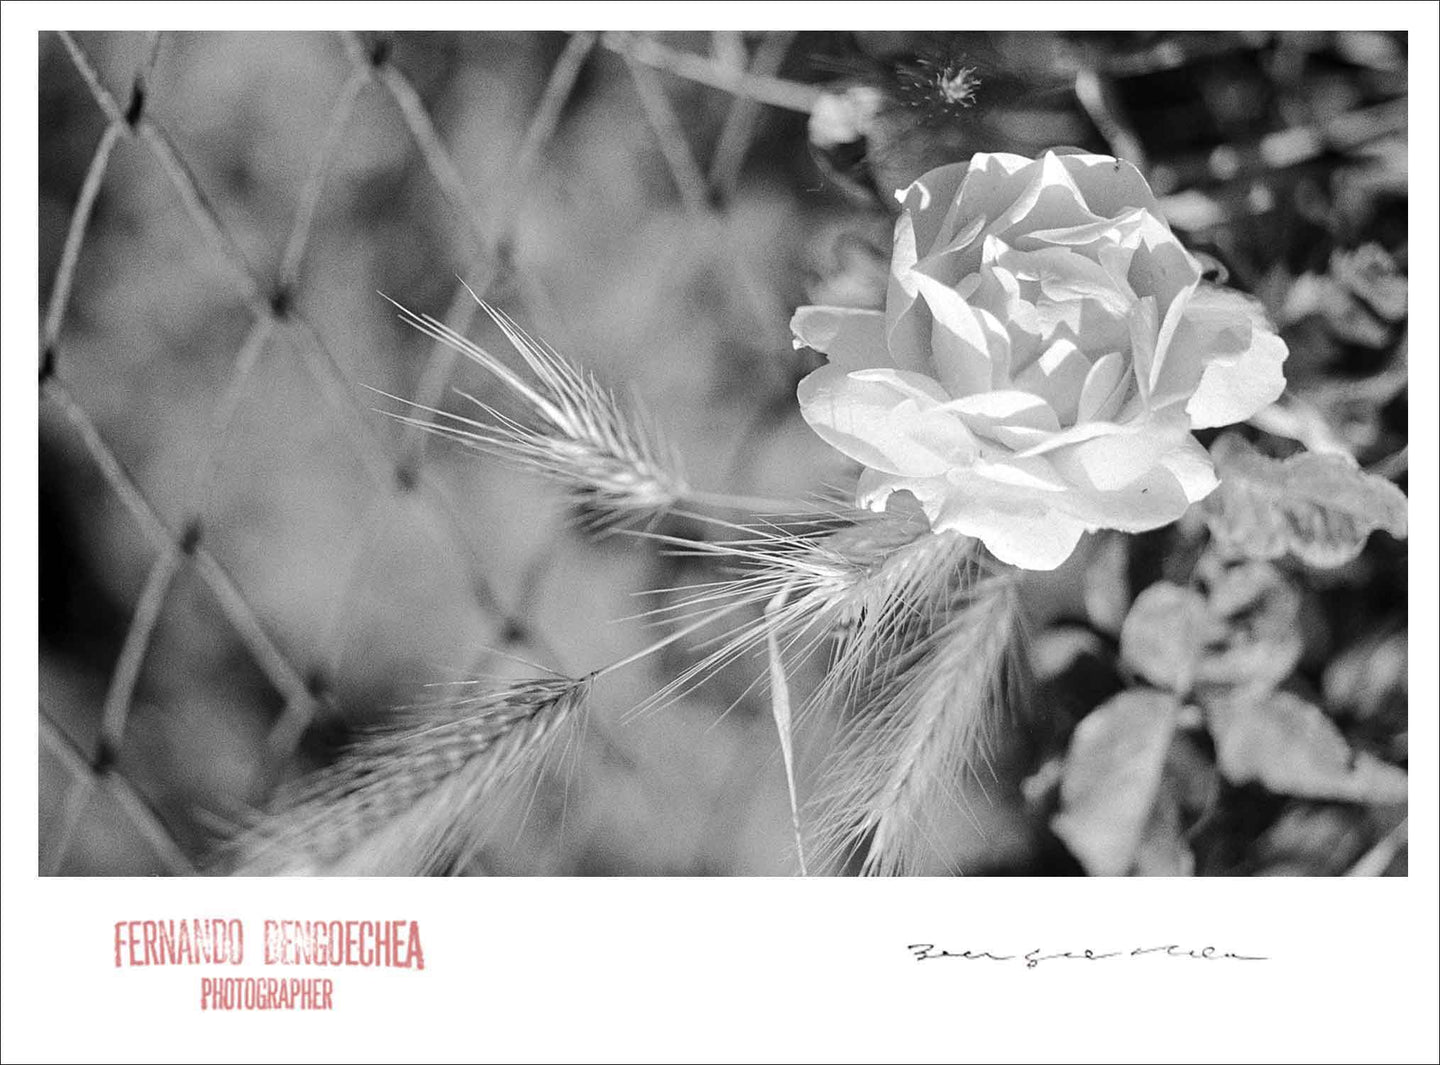 IN MEMORY - Giclee Print - Stamped and Signed